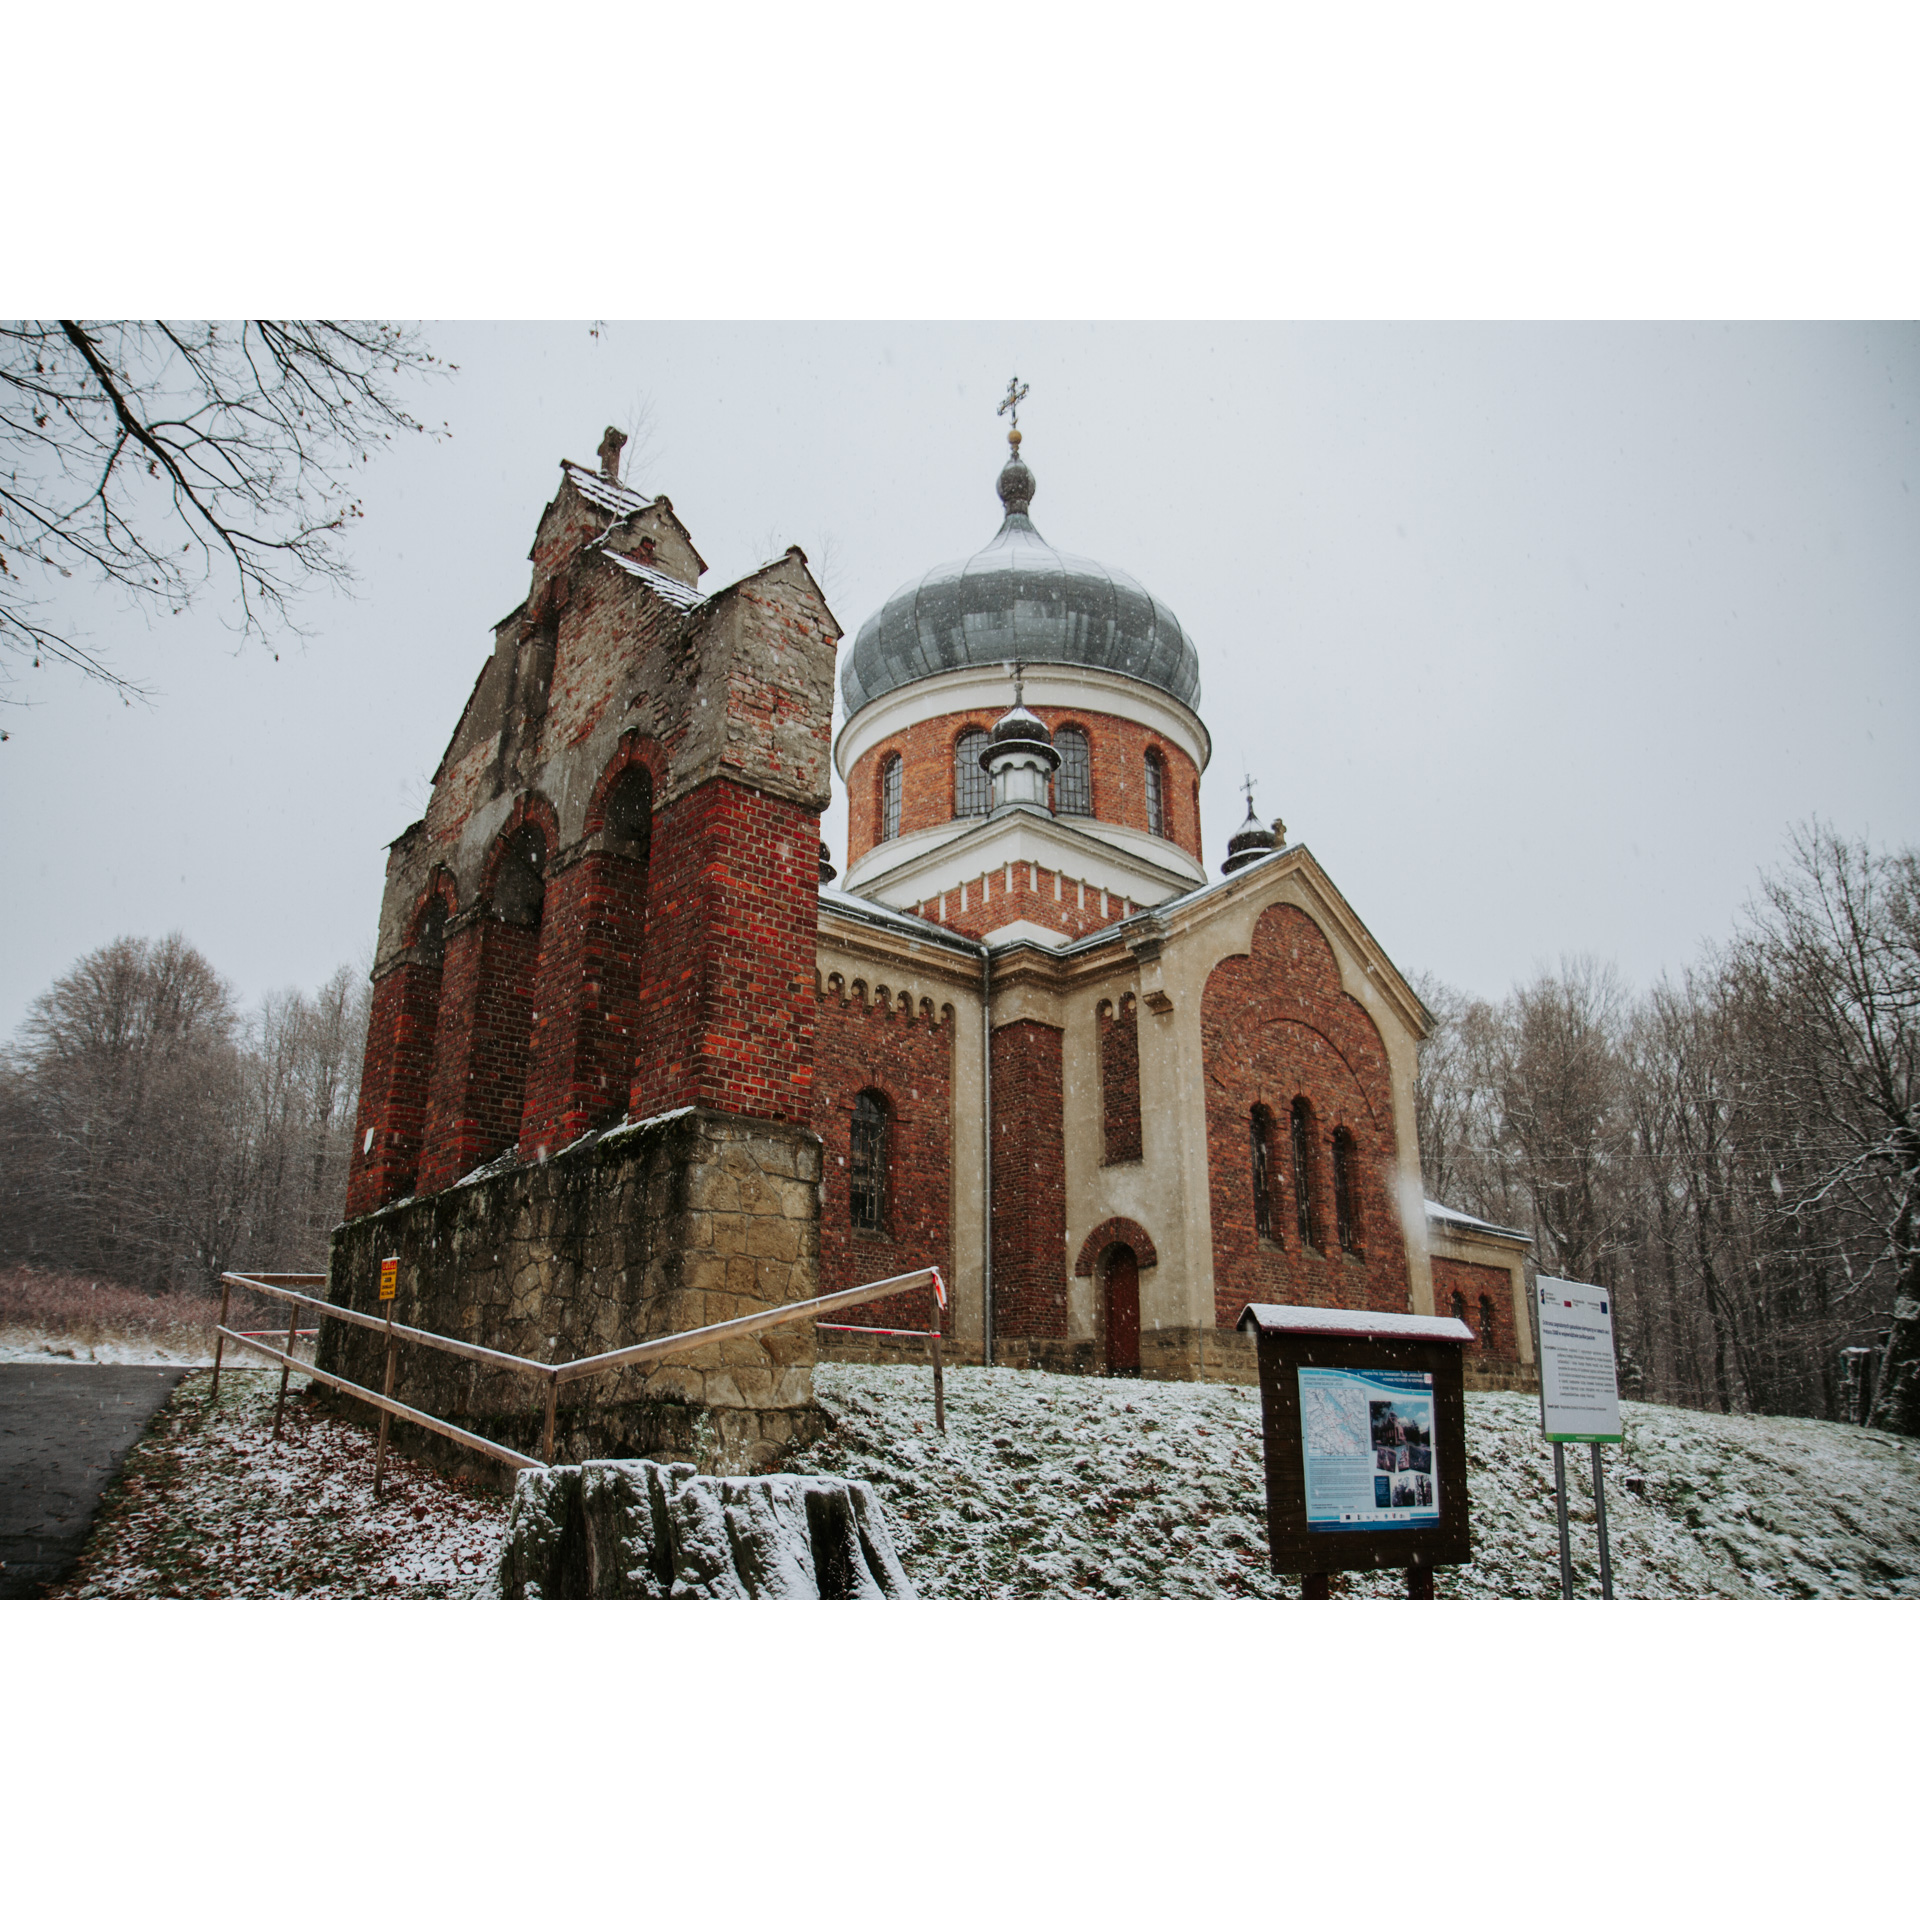 A red brick church with an old bell tower on a snow-covered hill